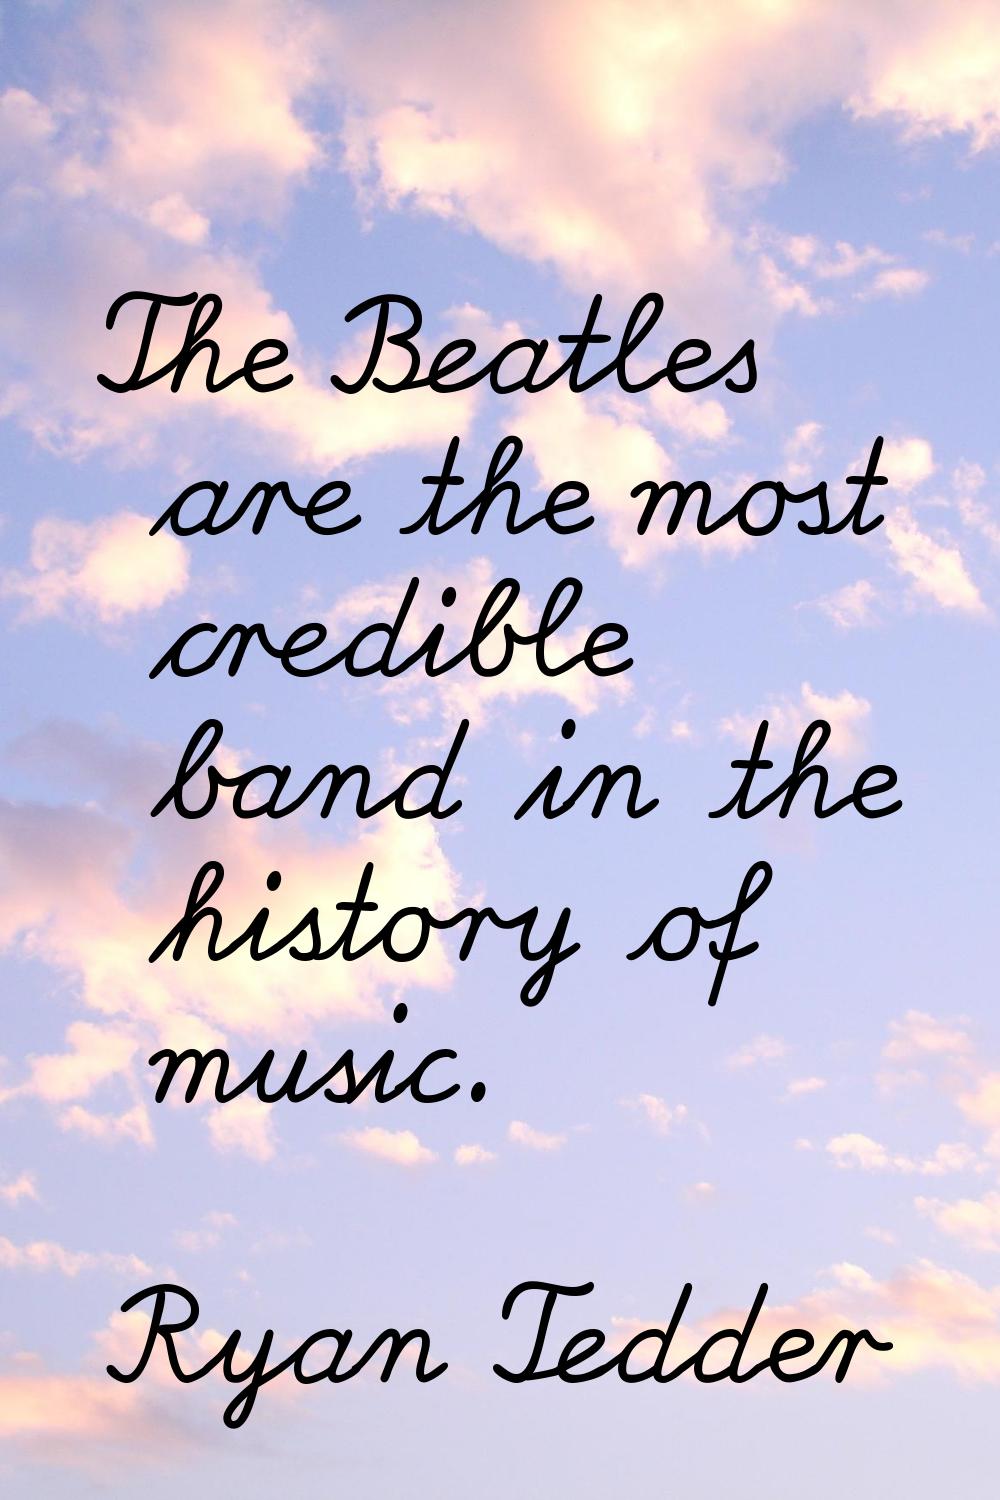 The Beatles are the most credible band in the history of music.